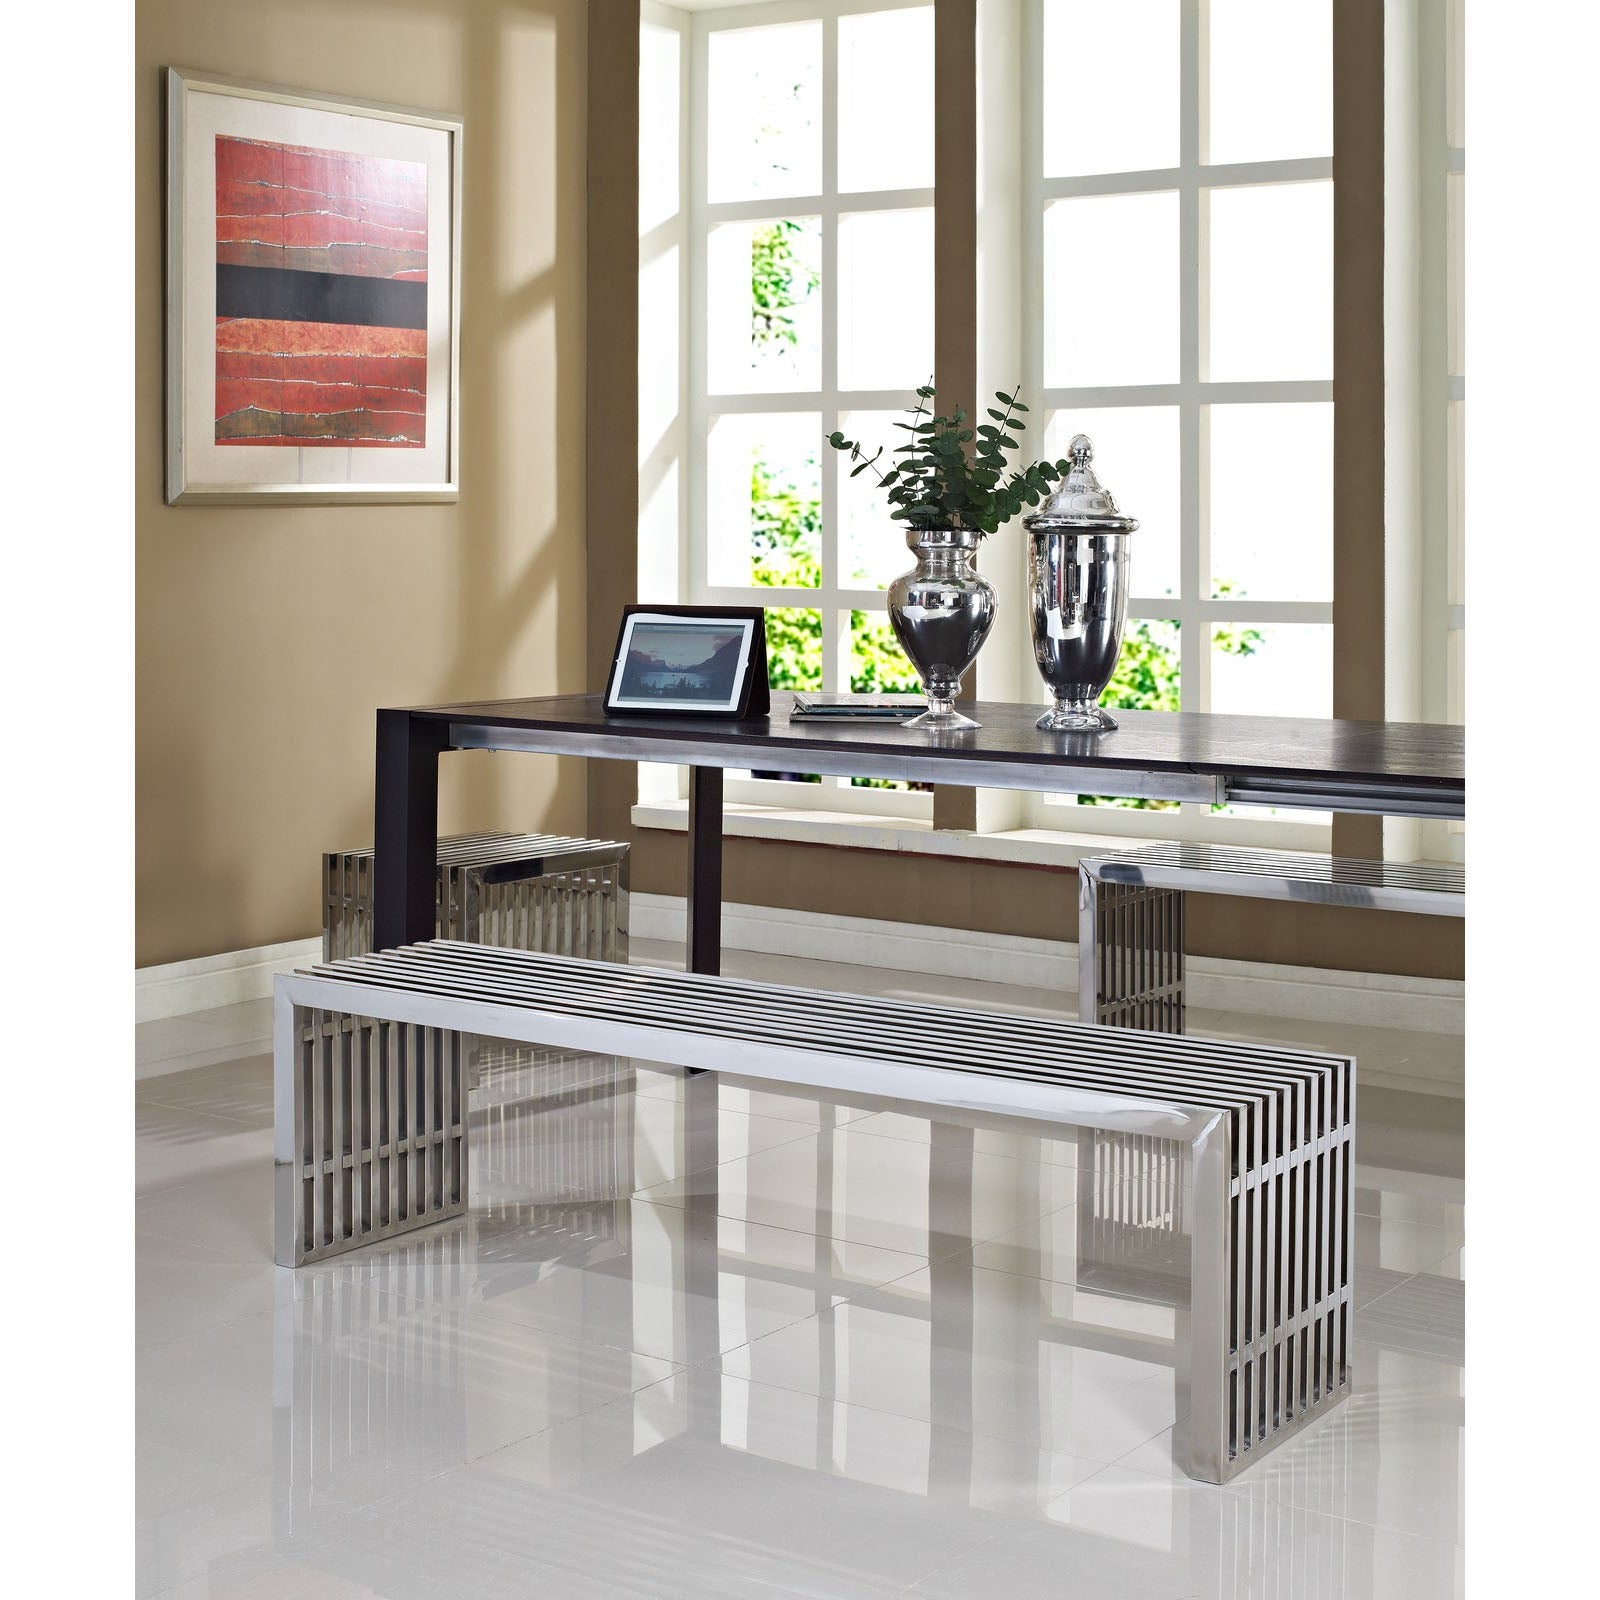 Gridiron Benches Set of 3 - East Shore Modern Home Furnishings